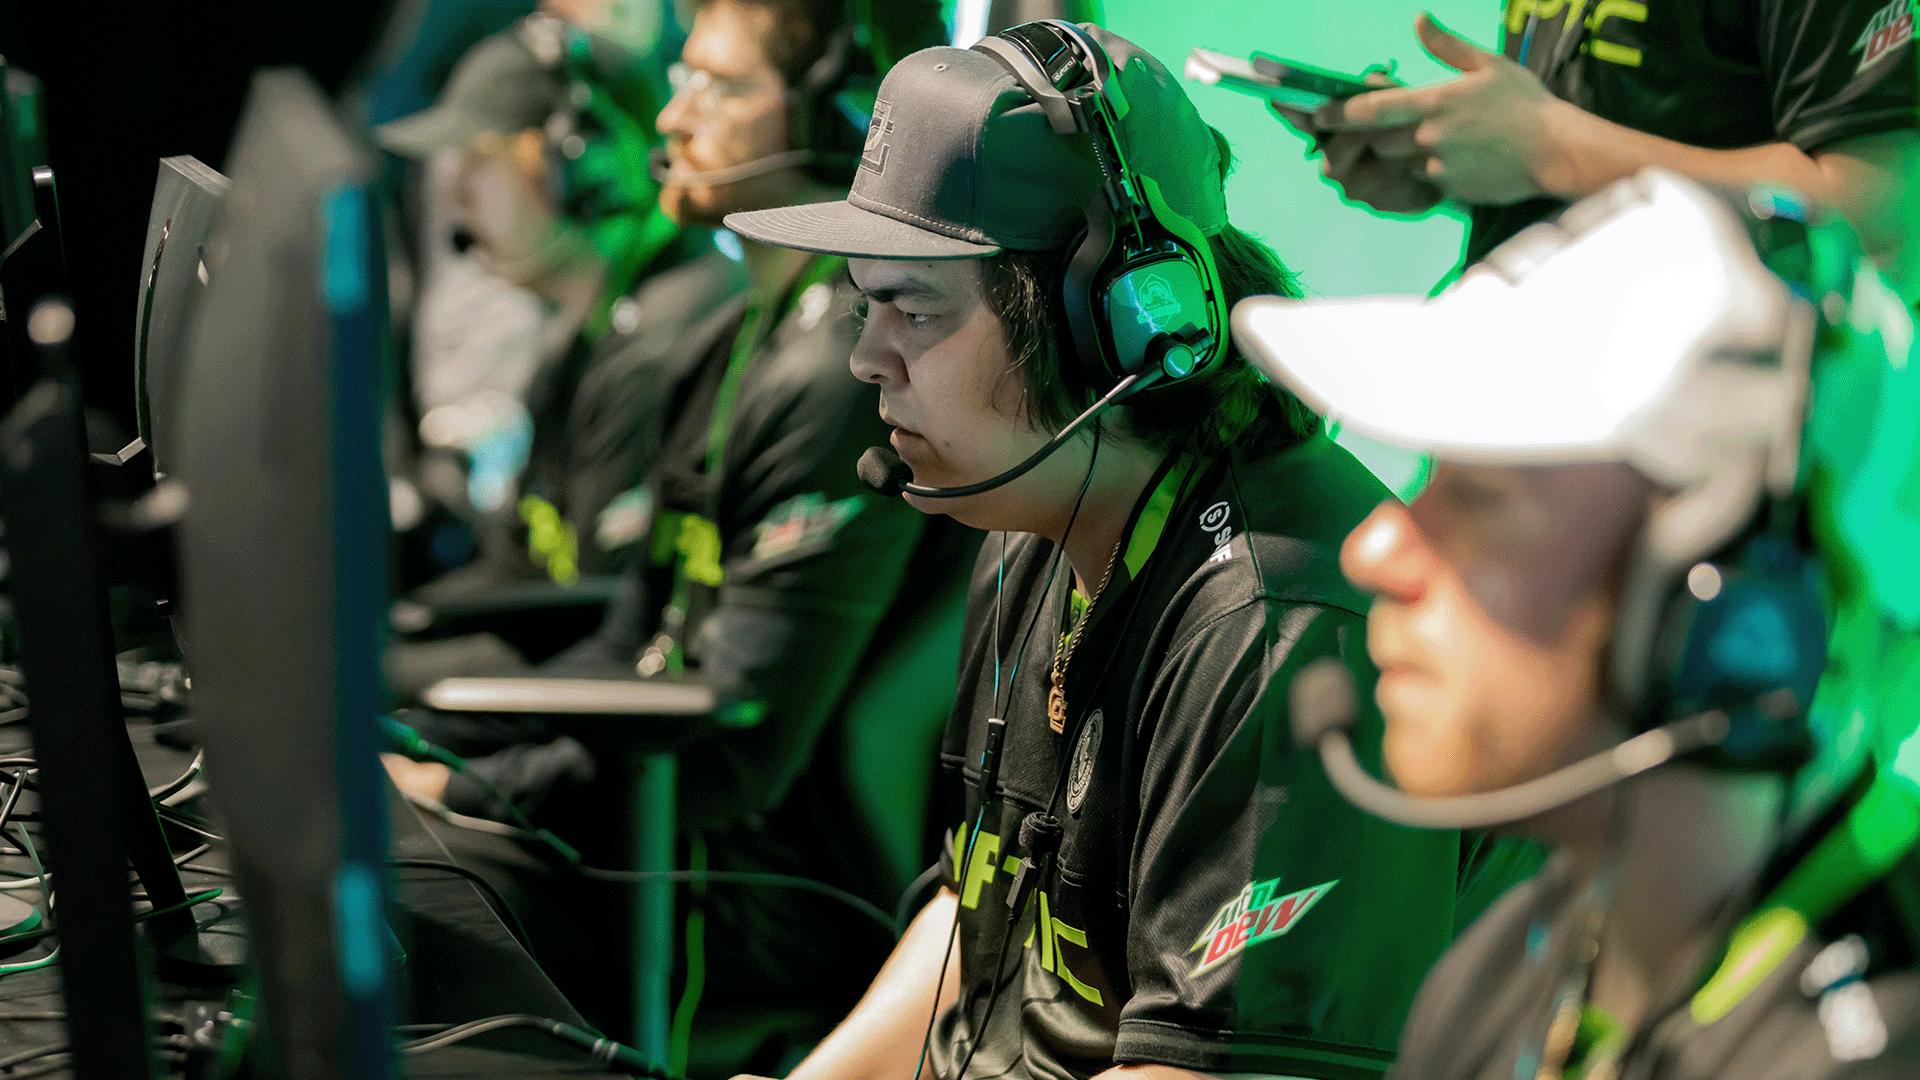 Players of team Optic Gaming competing on the HCS main stage